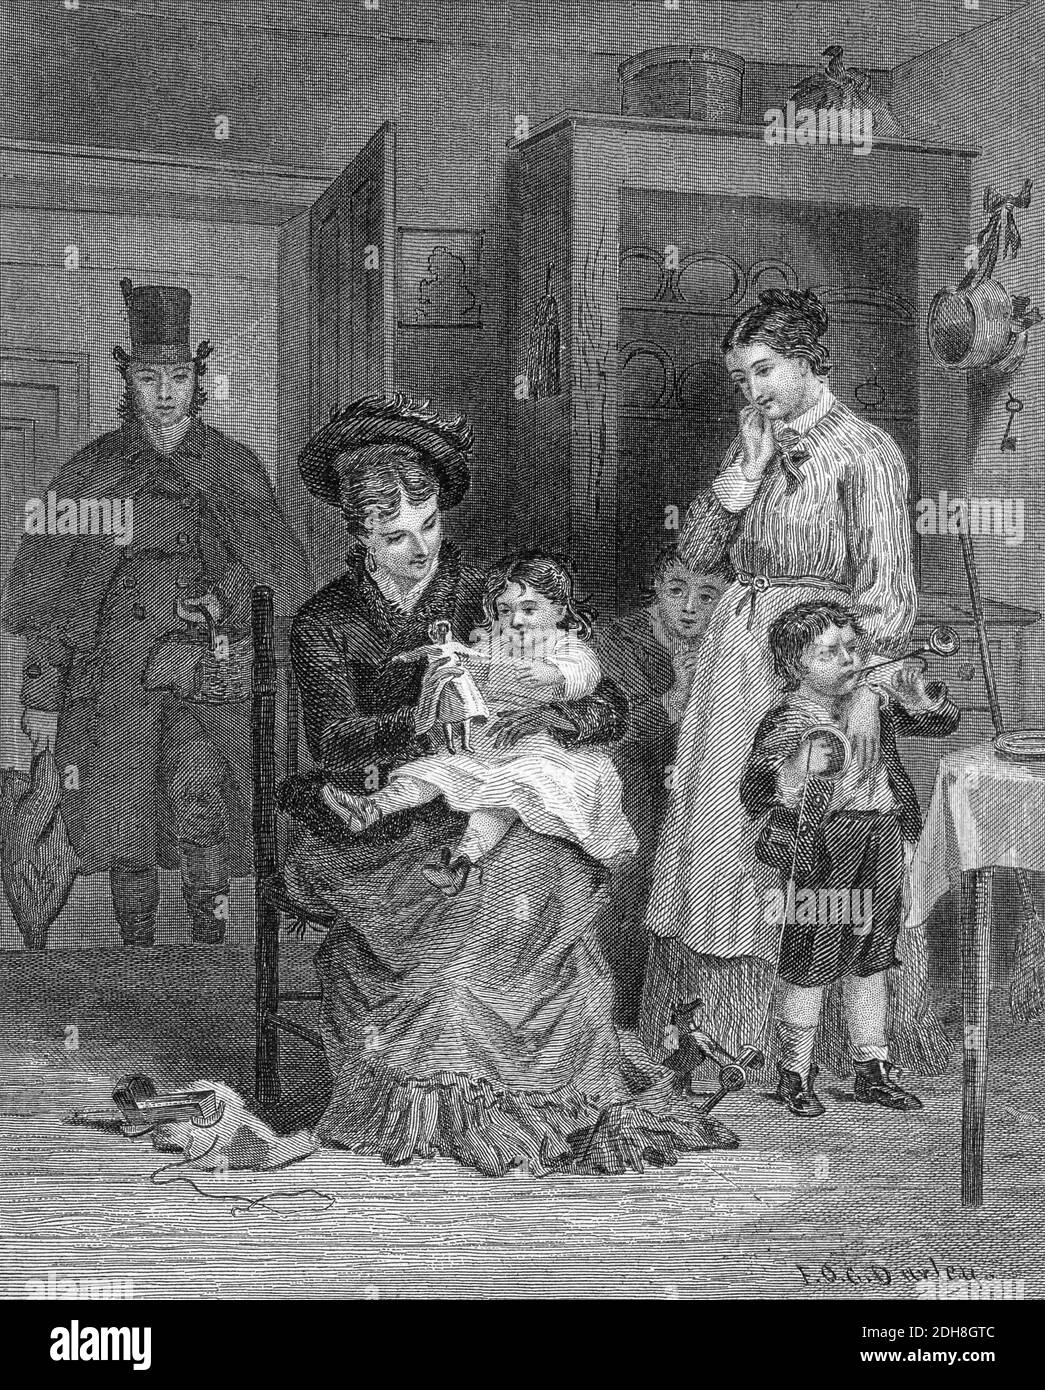 A Merry Christmas greeting from Godey's Lady's Book and Magazine, Vol 101 July to December 1880 in Philadelphia Stock Photo